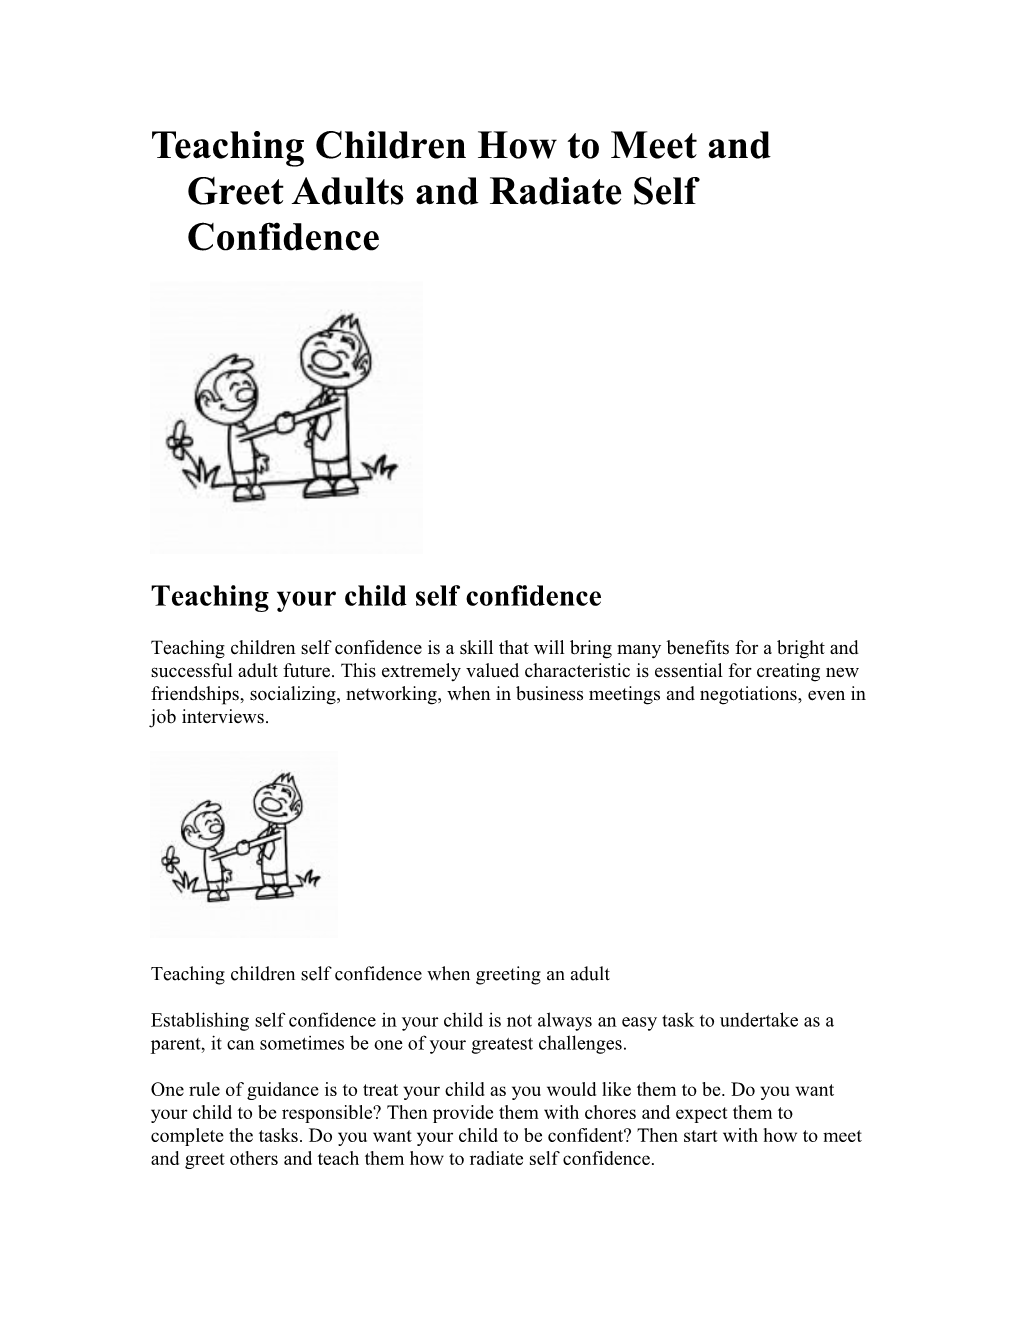 Teaching Children How to Meet and Greet Adults and Radiate Self Confidence